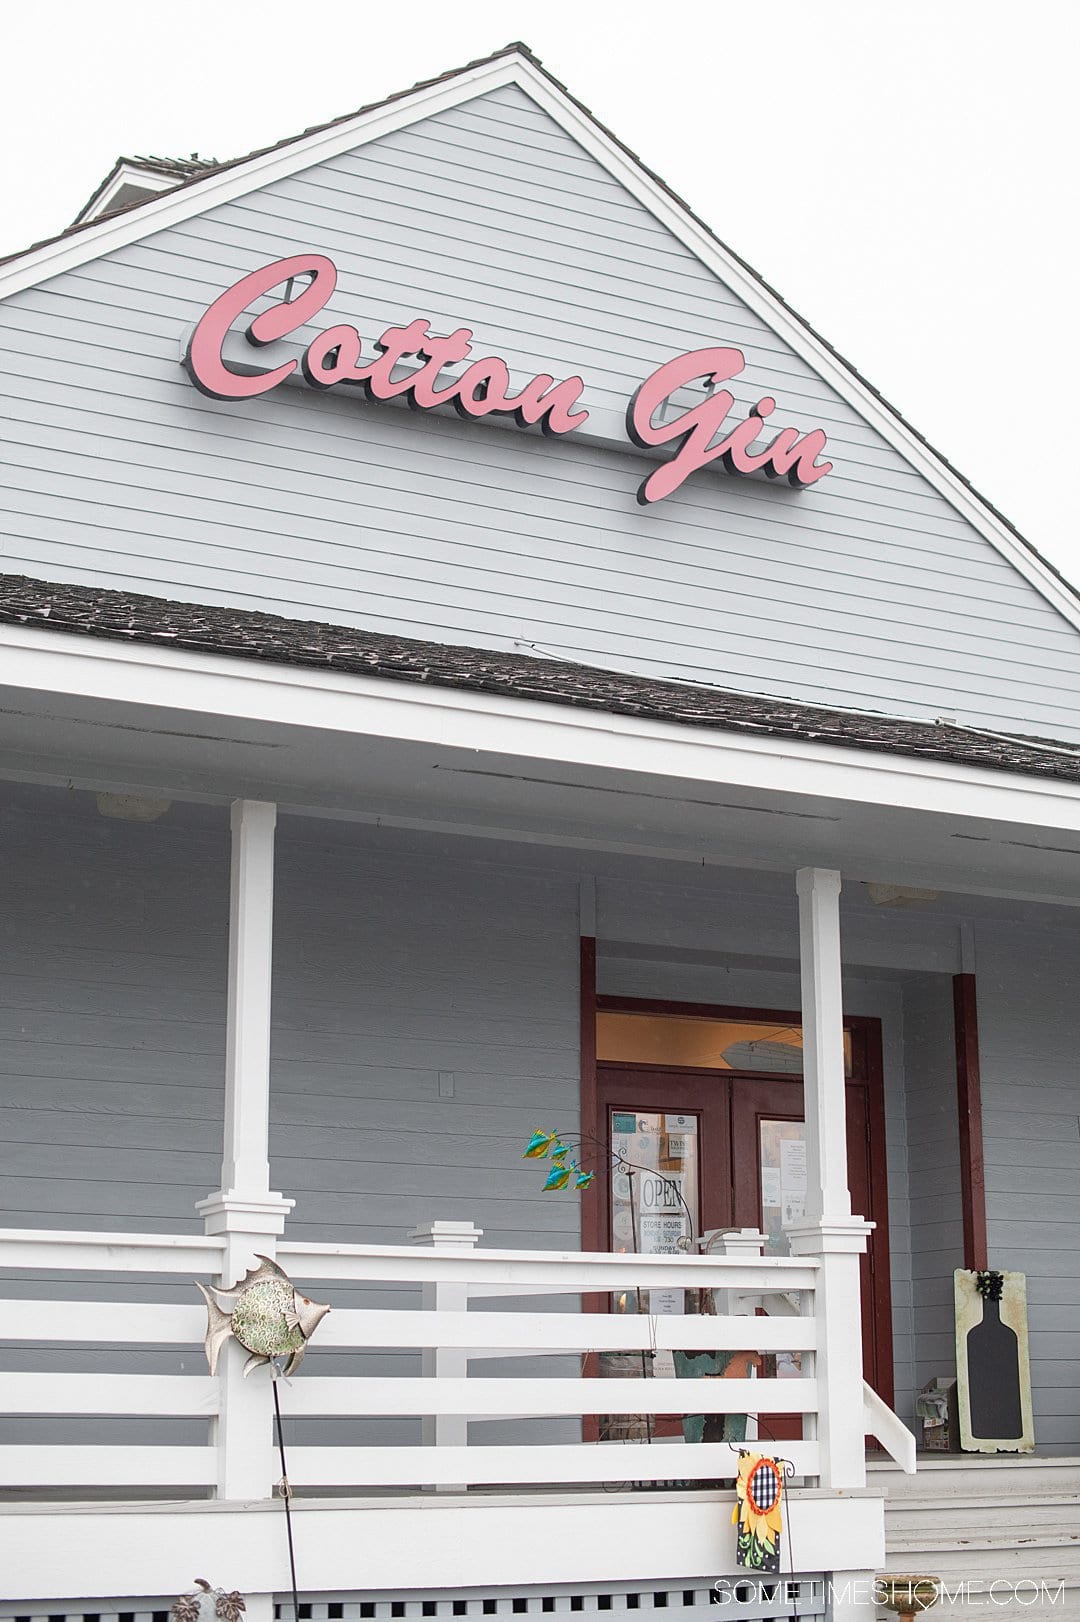 Grey building in the Outer Banks that says Cotton Gin in red letters.